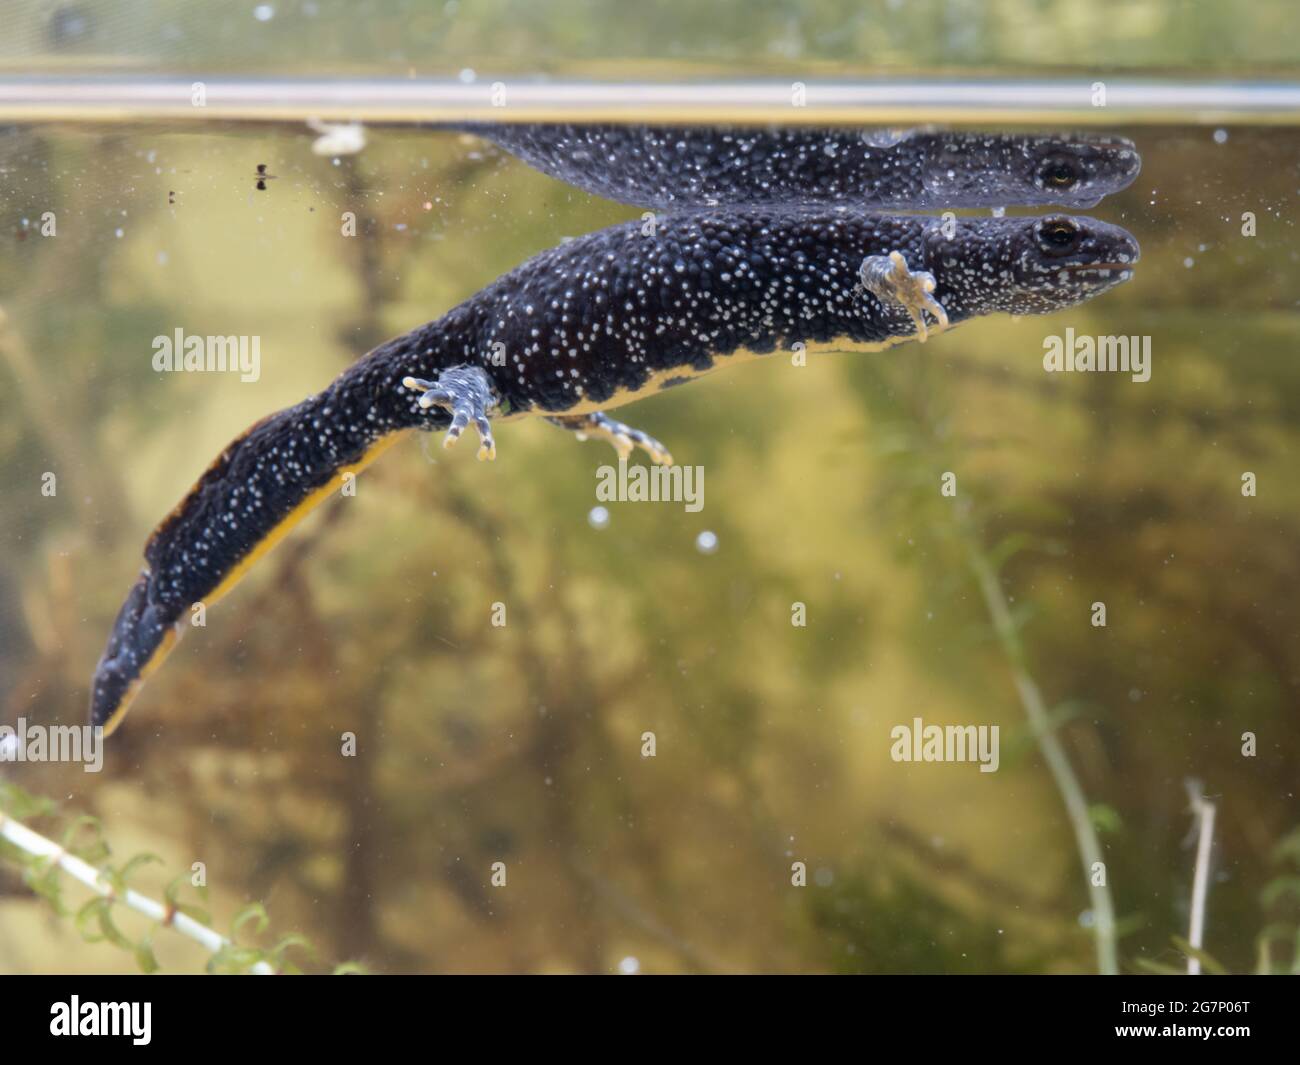 Great Crested Newt also known as the Northern Crested Newt,  or Warty Newt (Triturus cristatus) Stock Photo